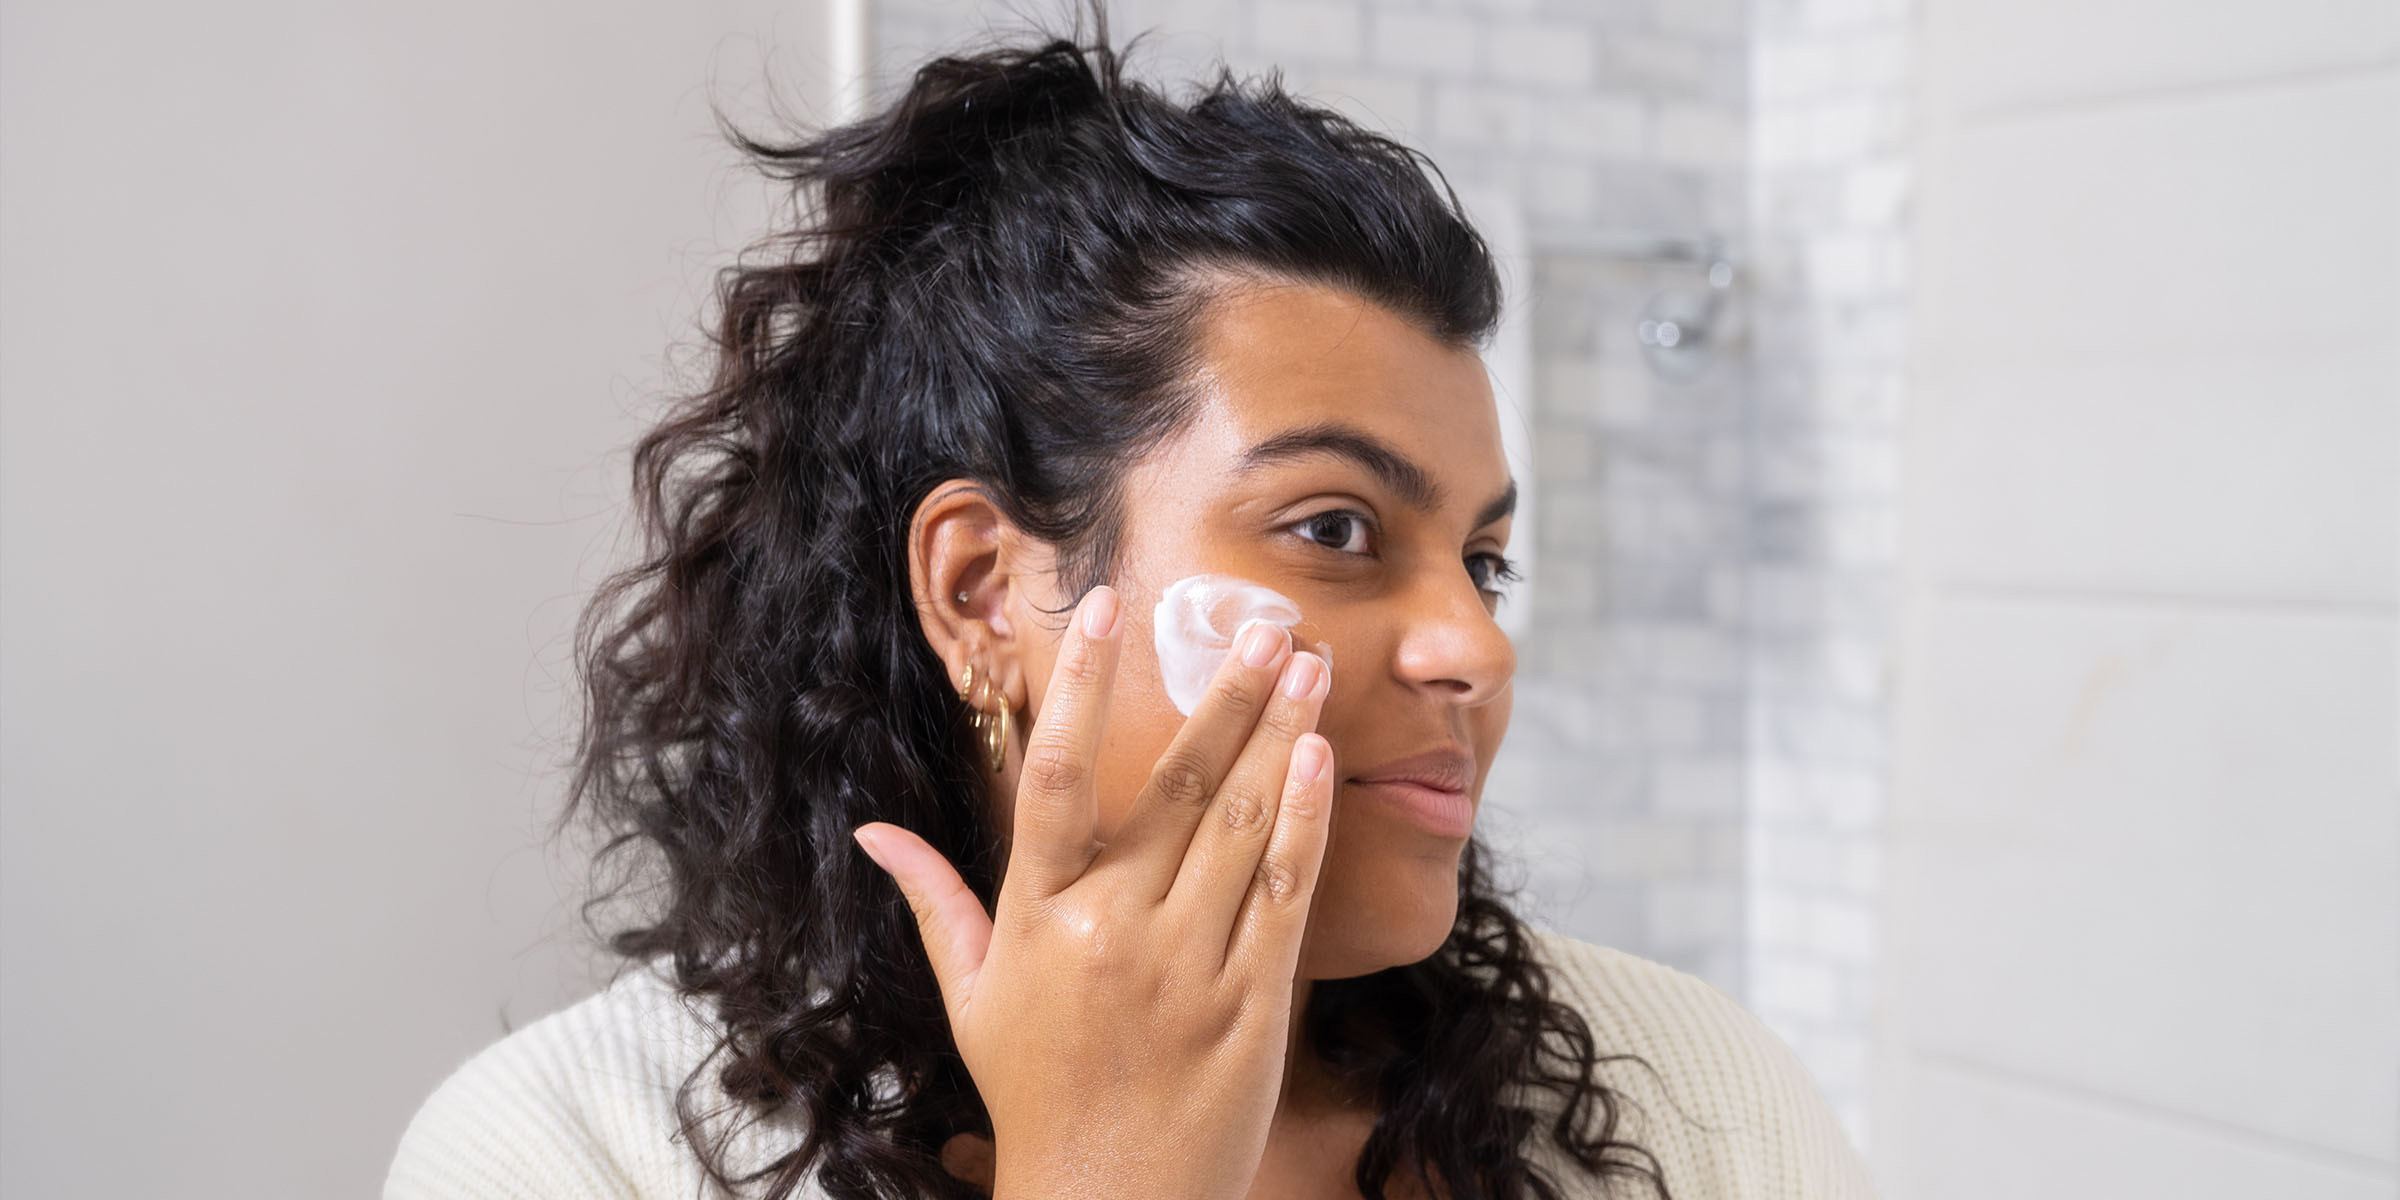 Is double cleansing actually good for your skin? We asked dermatologists